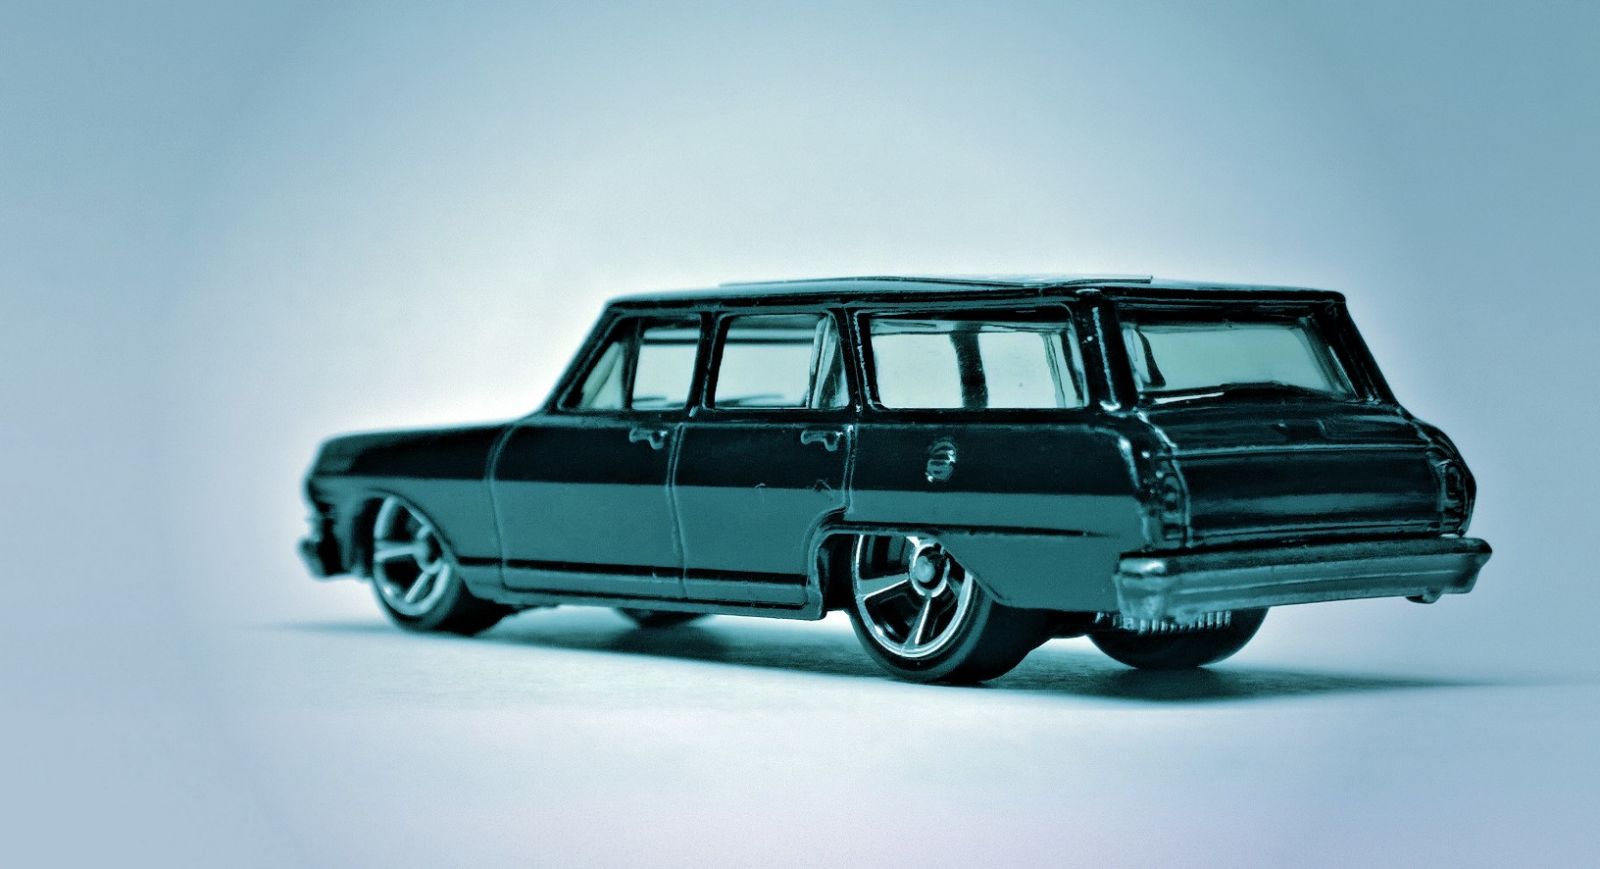 Illustration for article titled Custom 64 Nova Wagon and the van from Old School!!